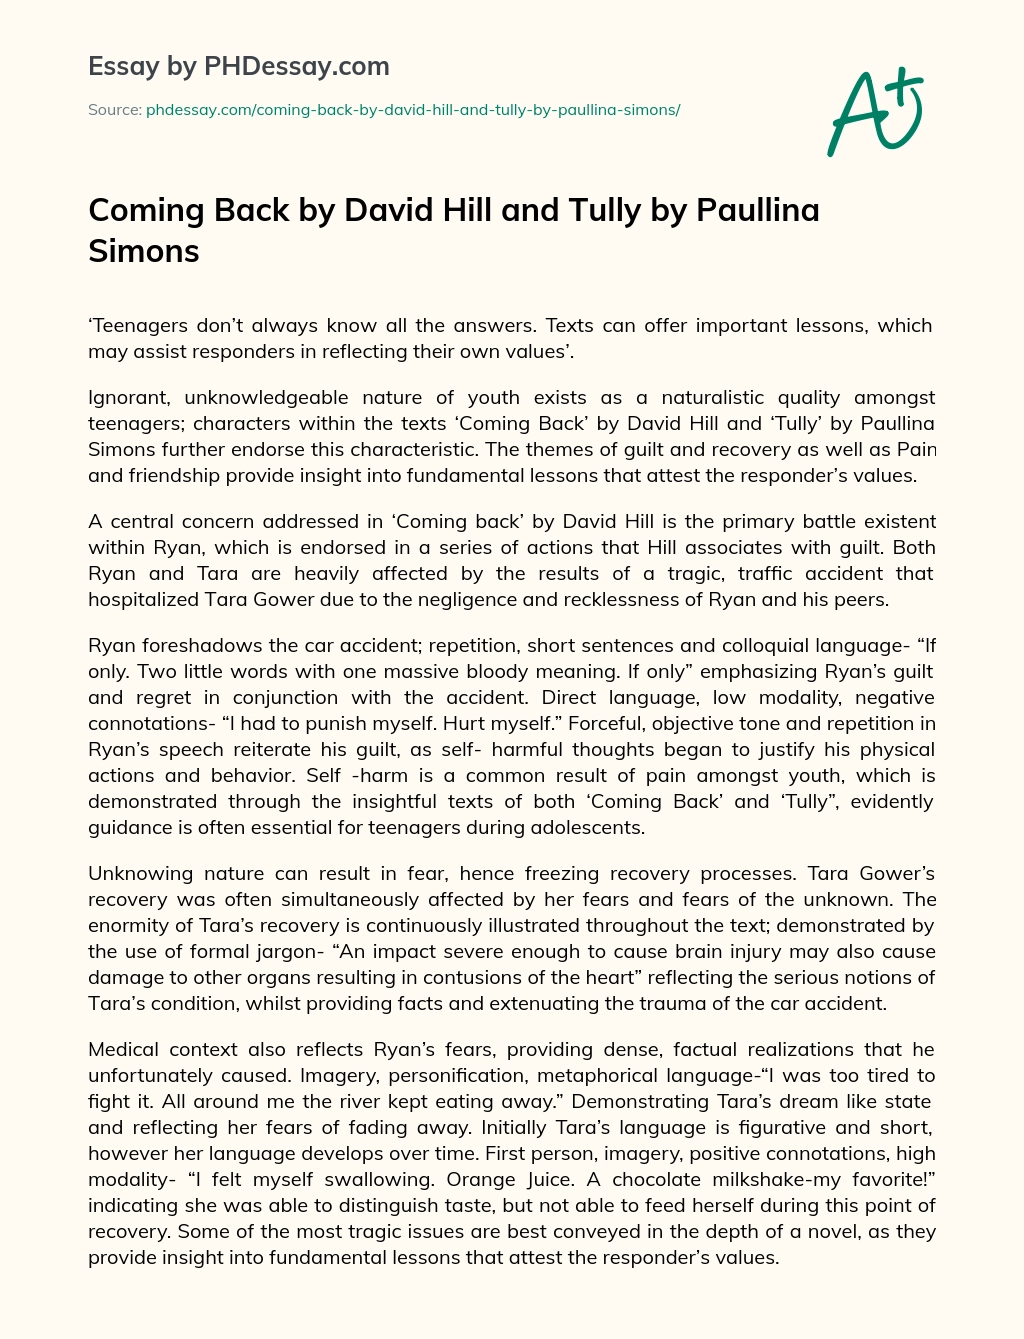 Coming Back by David Hill and Tully by Paullina Simons essay